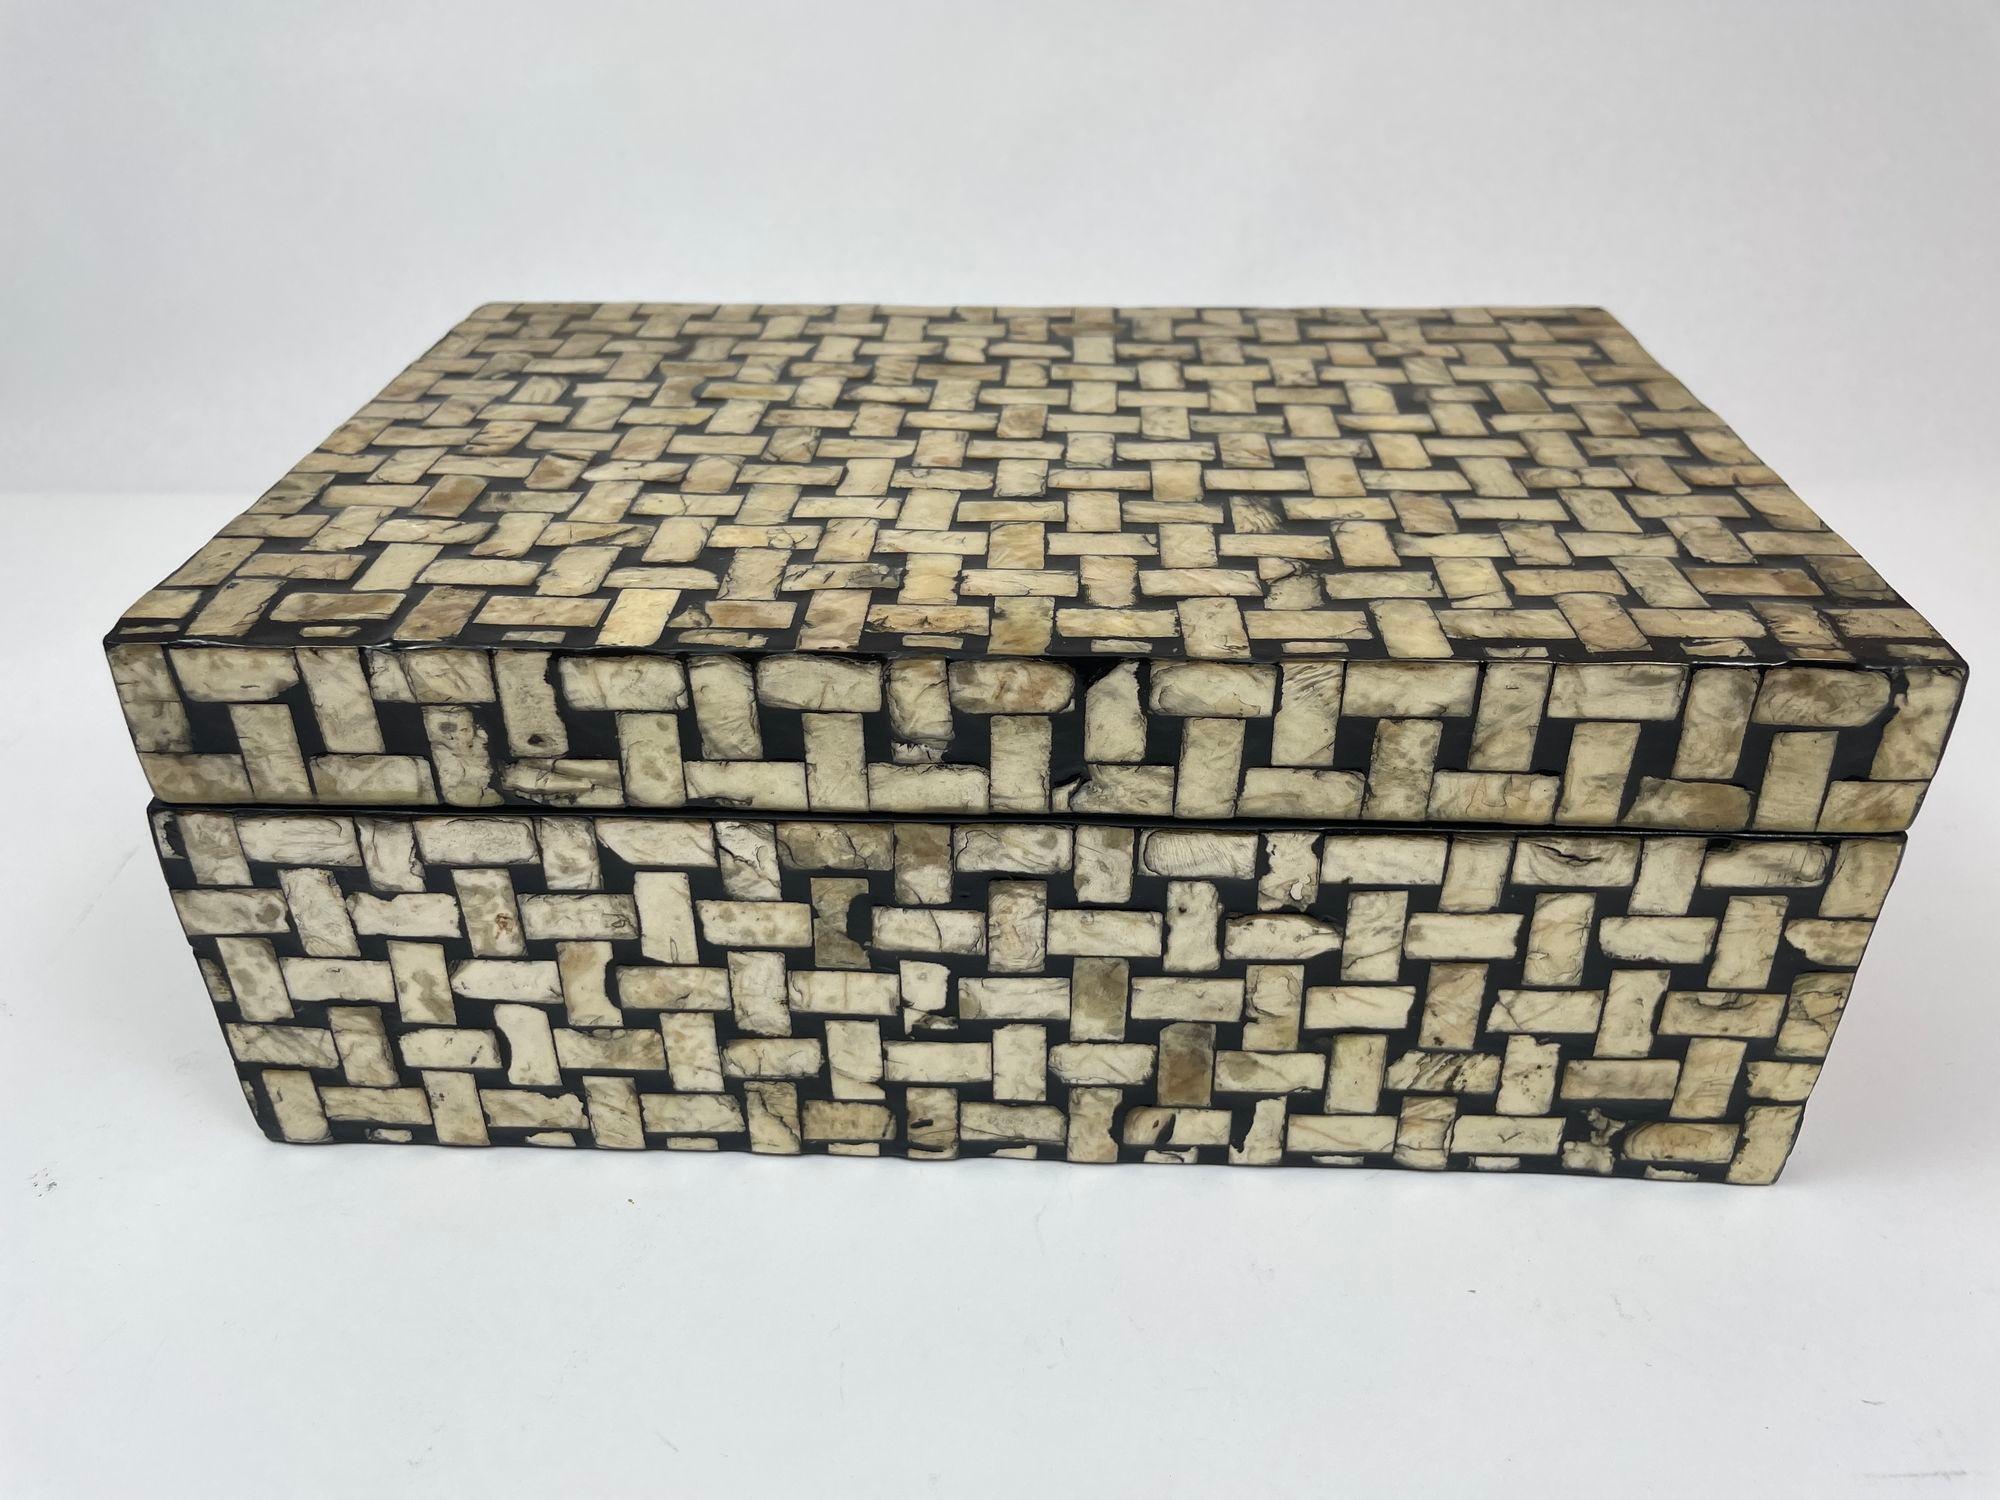 Wooden Rectangle Box Covered in Abalone Shell and black resin.
Mosaic tessellated shell mother of pearl decorative jewellery or trinket decorative box.
Dimensions: Height: 4.5 in Width: 11.5 in Depth: 7.5 in.